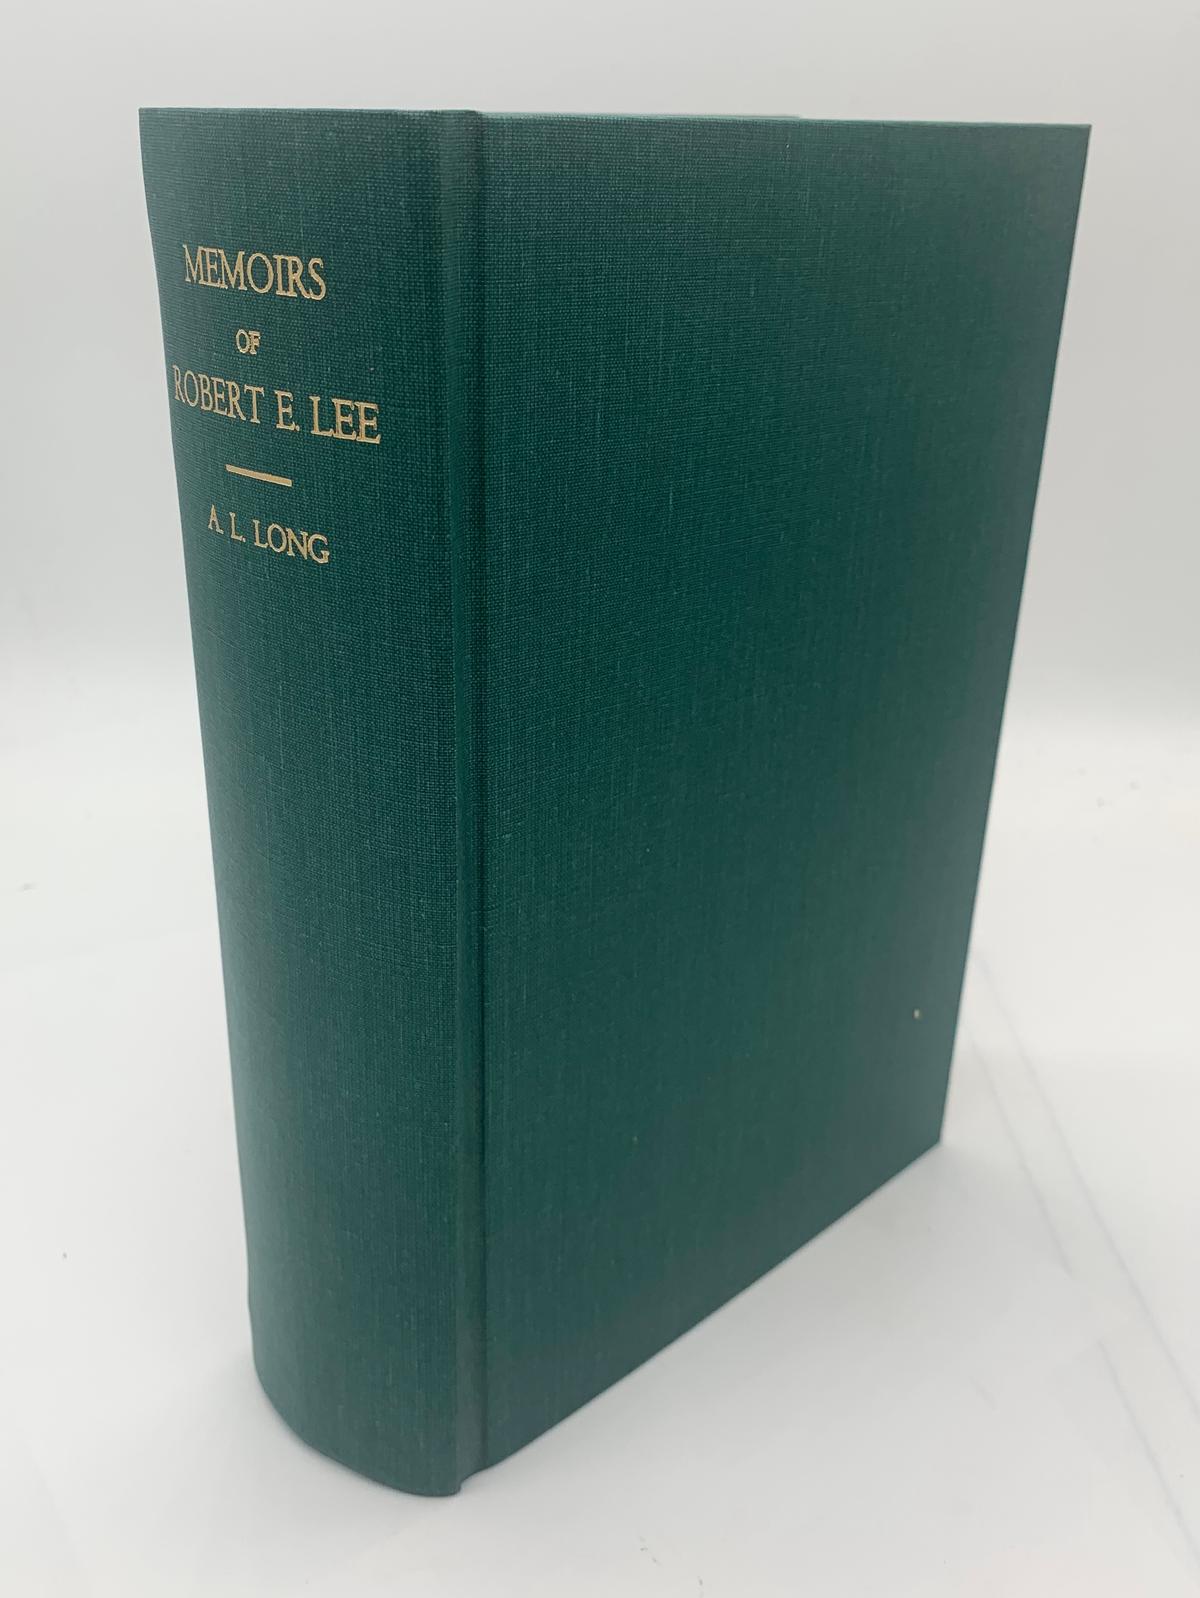 Memoirs of ROBERT E. LEE, His Military and Personal History (1886)